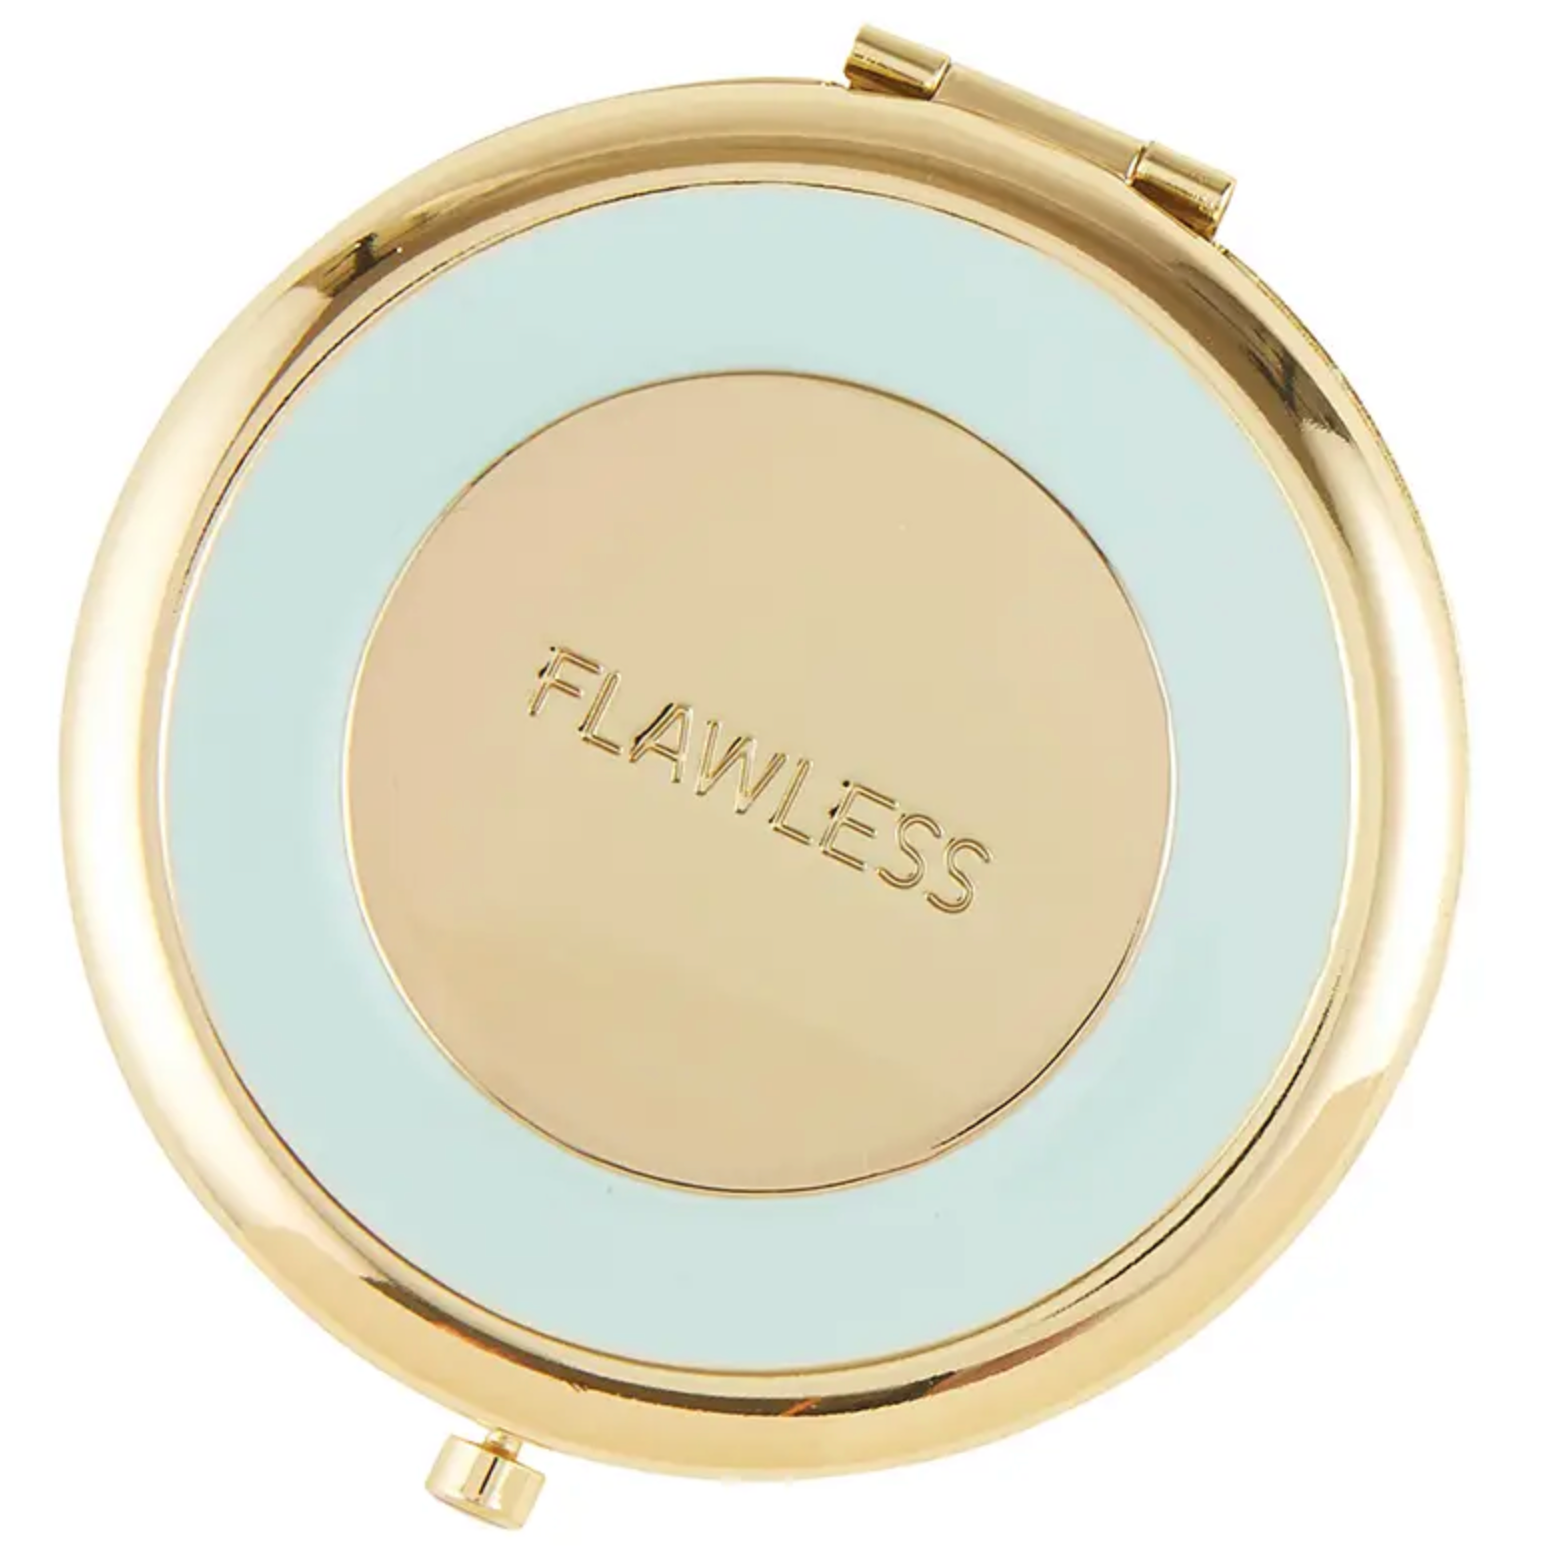 Flawless Compact Mirror